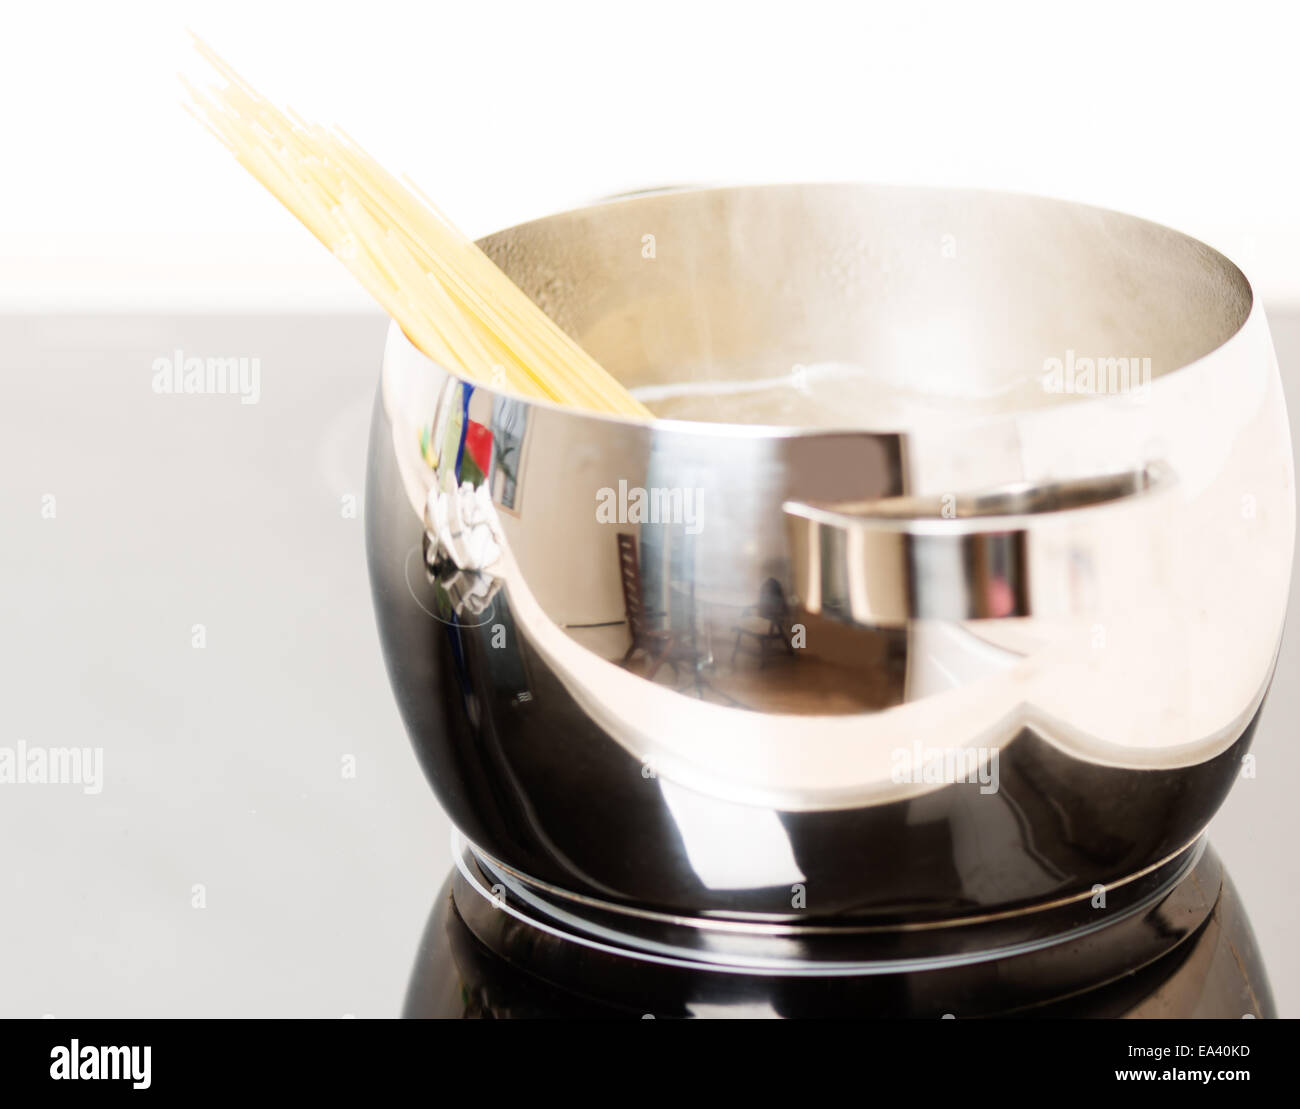 Pan with spaghetti cooking Stock Photo